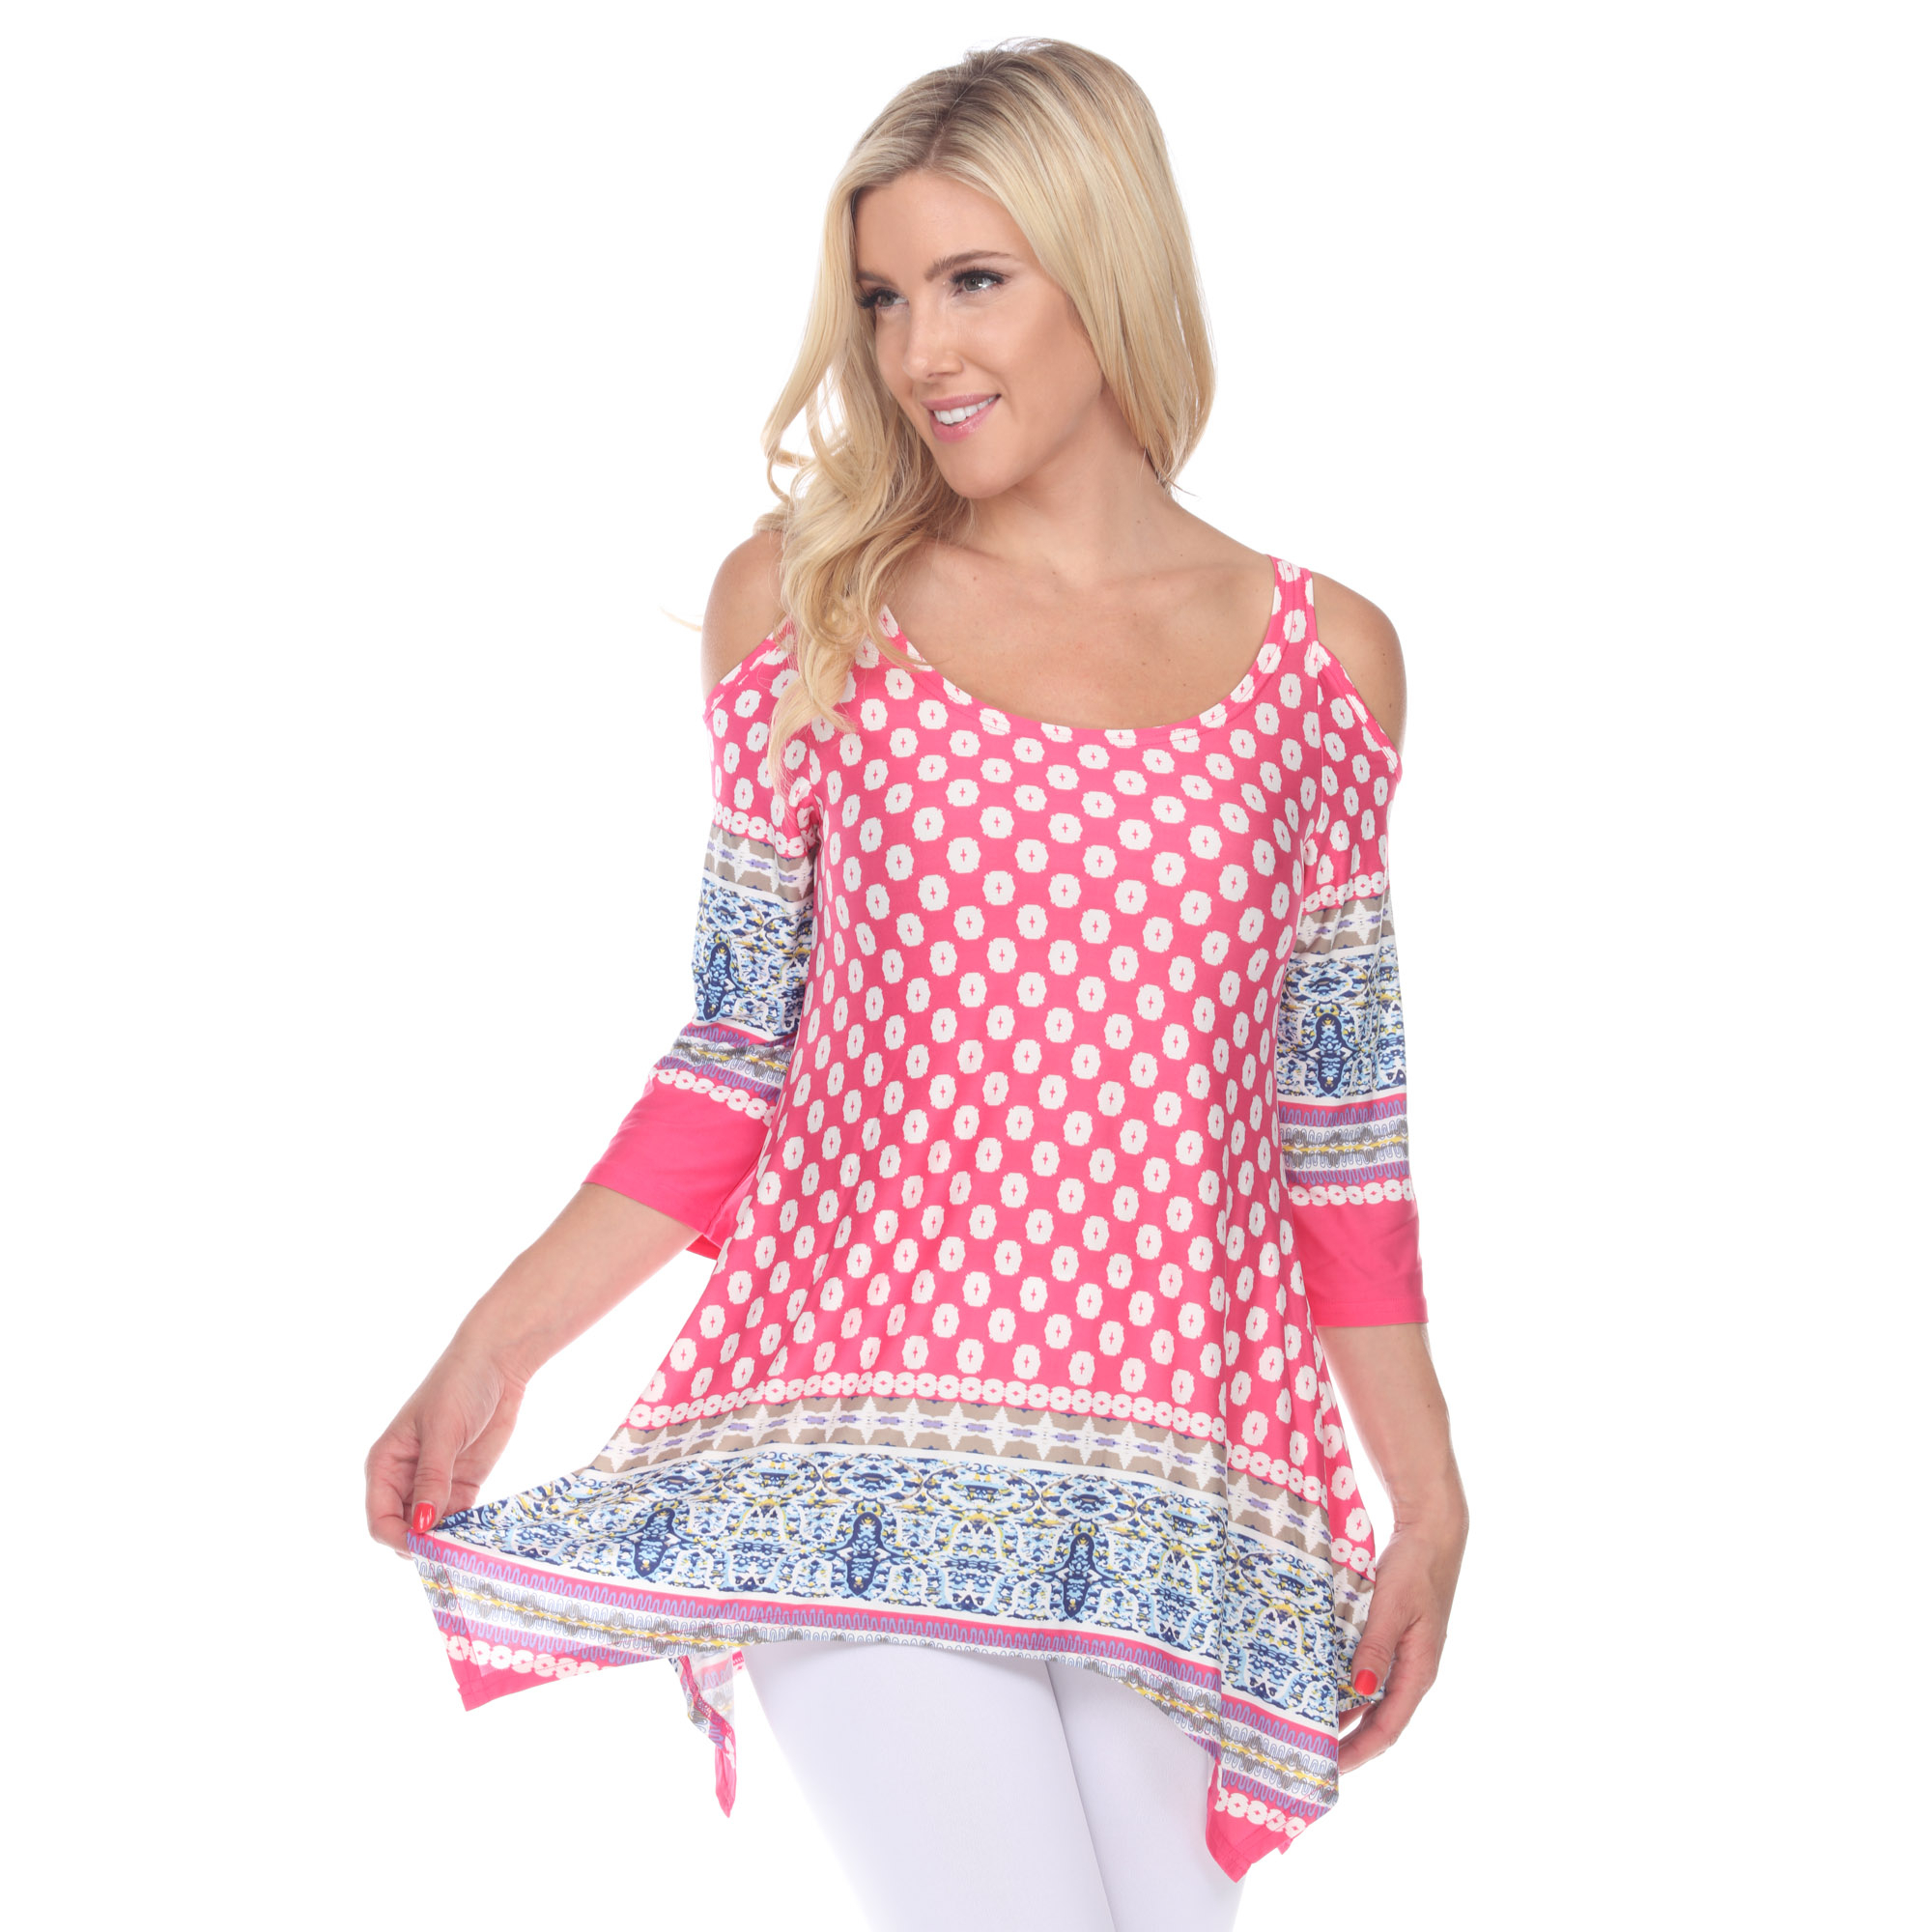 White Mark Women's Cold Shoulder Quarter Sleeve Printed Tunic Top With Pockets - Pink/White Polka Dots, 1X